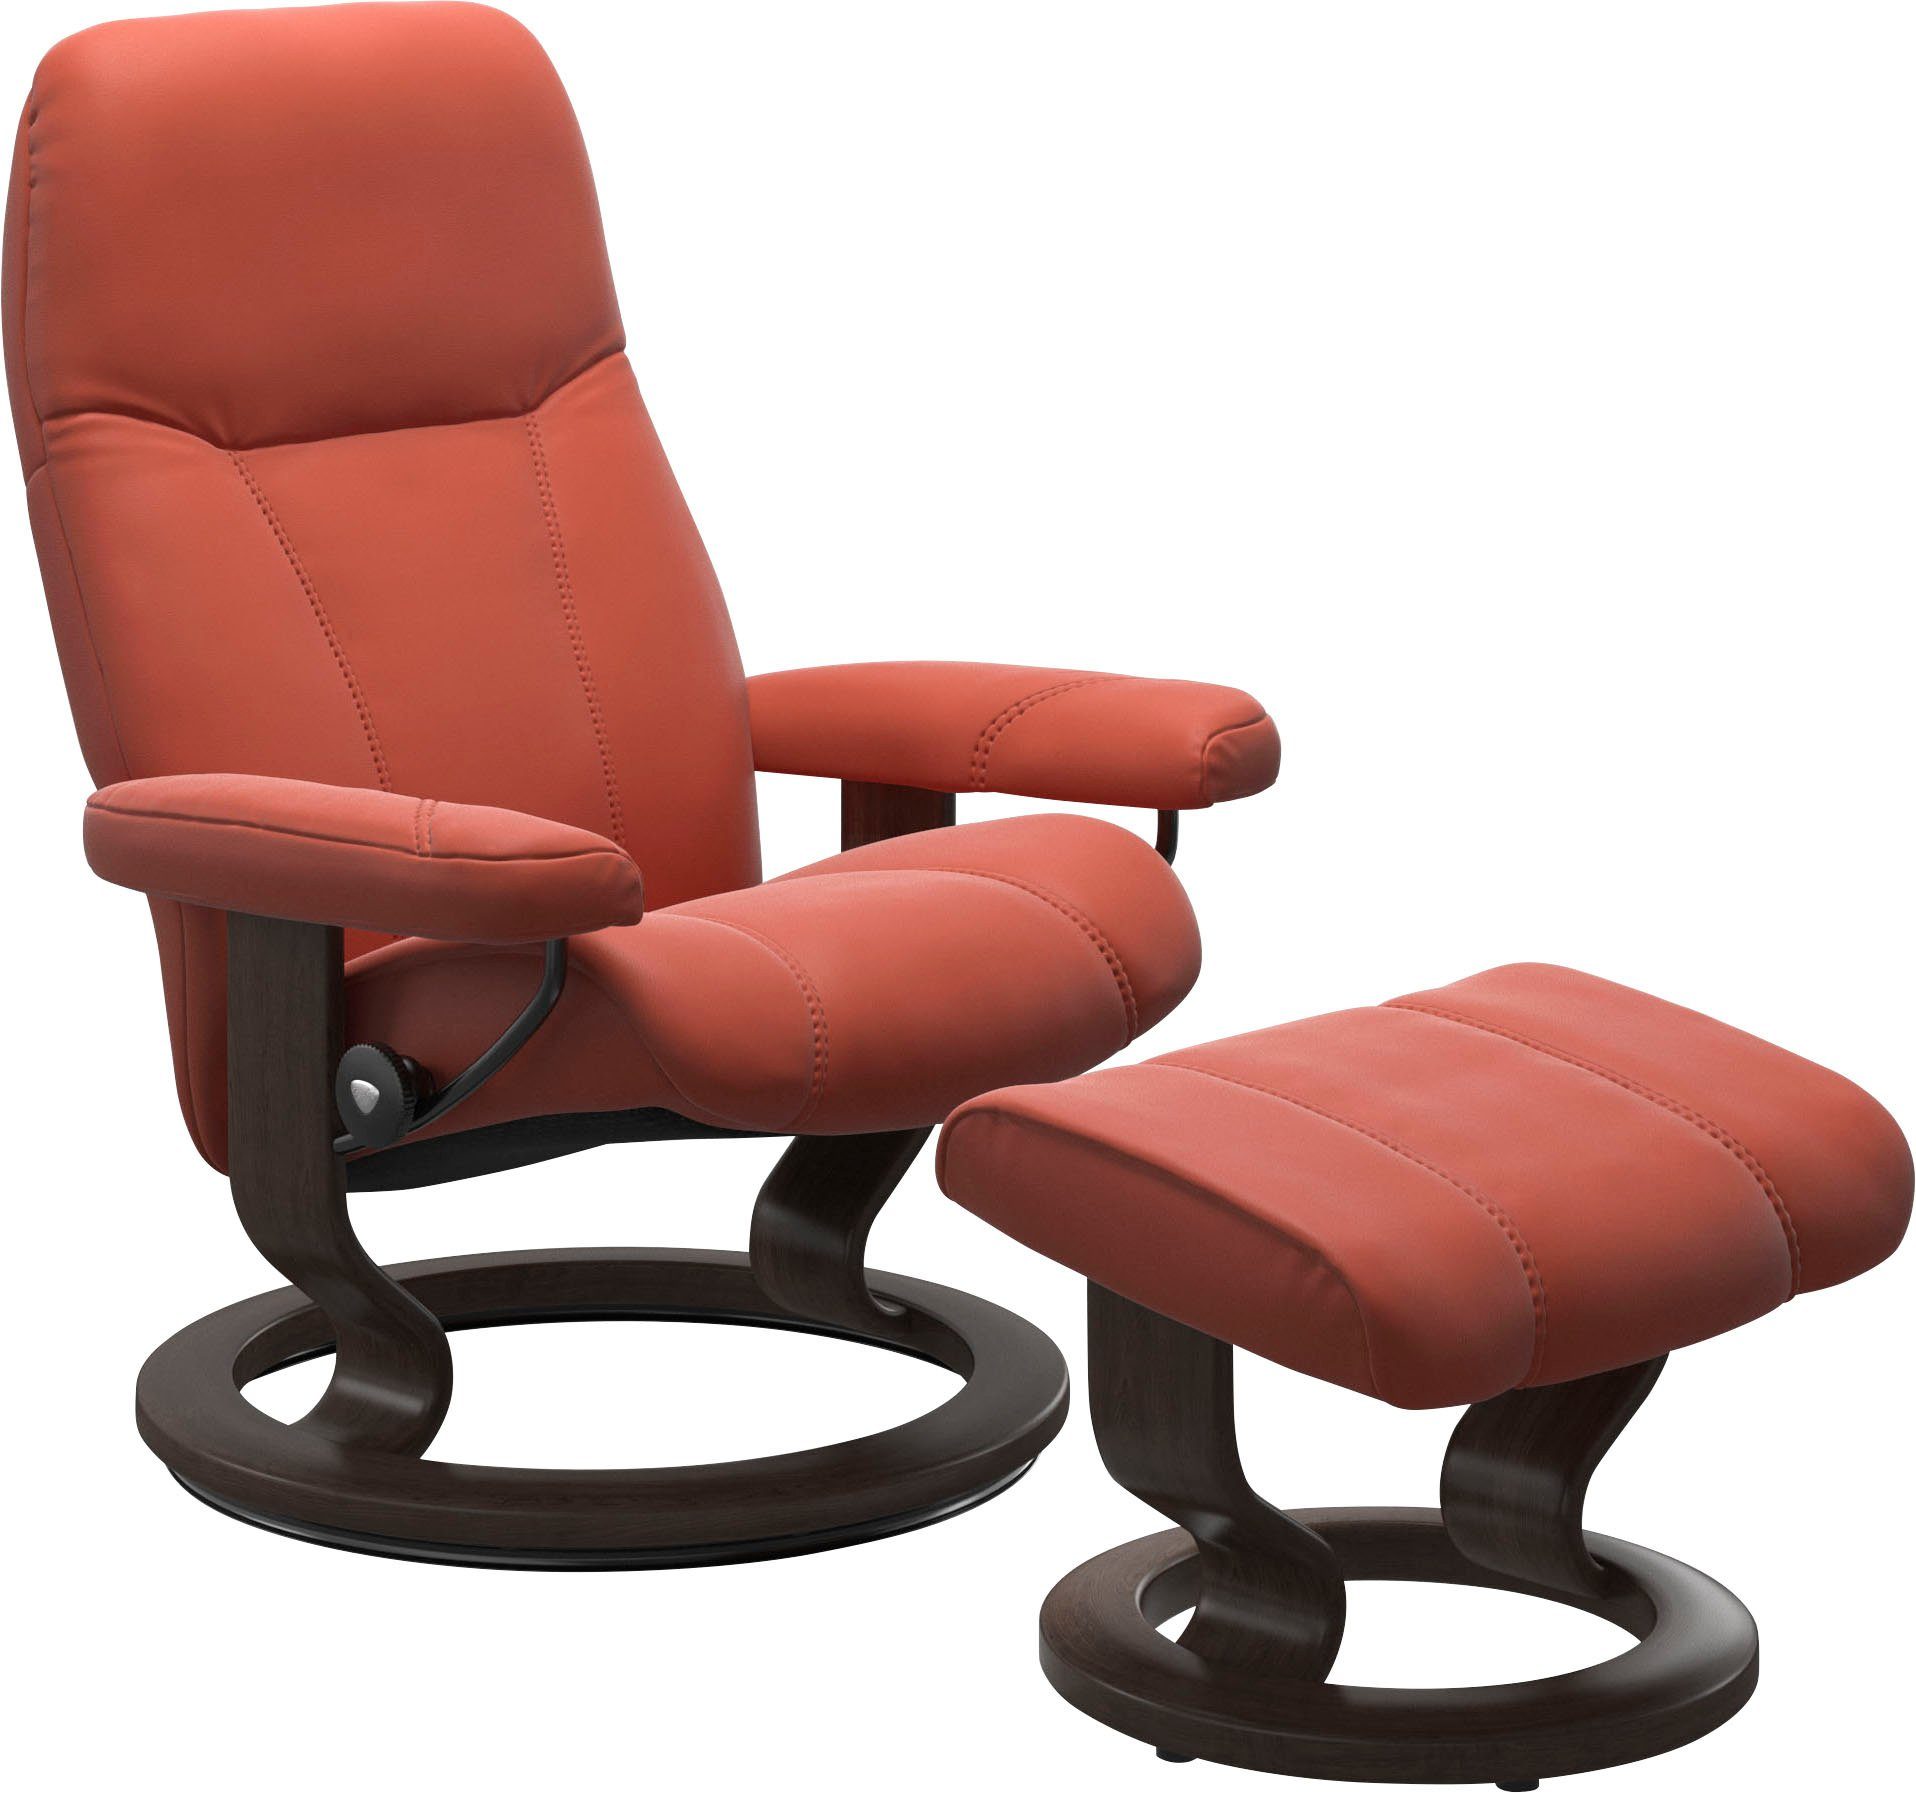 Stressless® Wenge Relaxsessel Base, Consul, Größe Gestell M, mit Classic